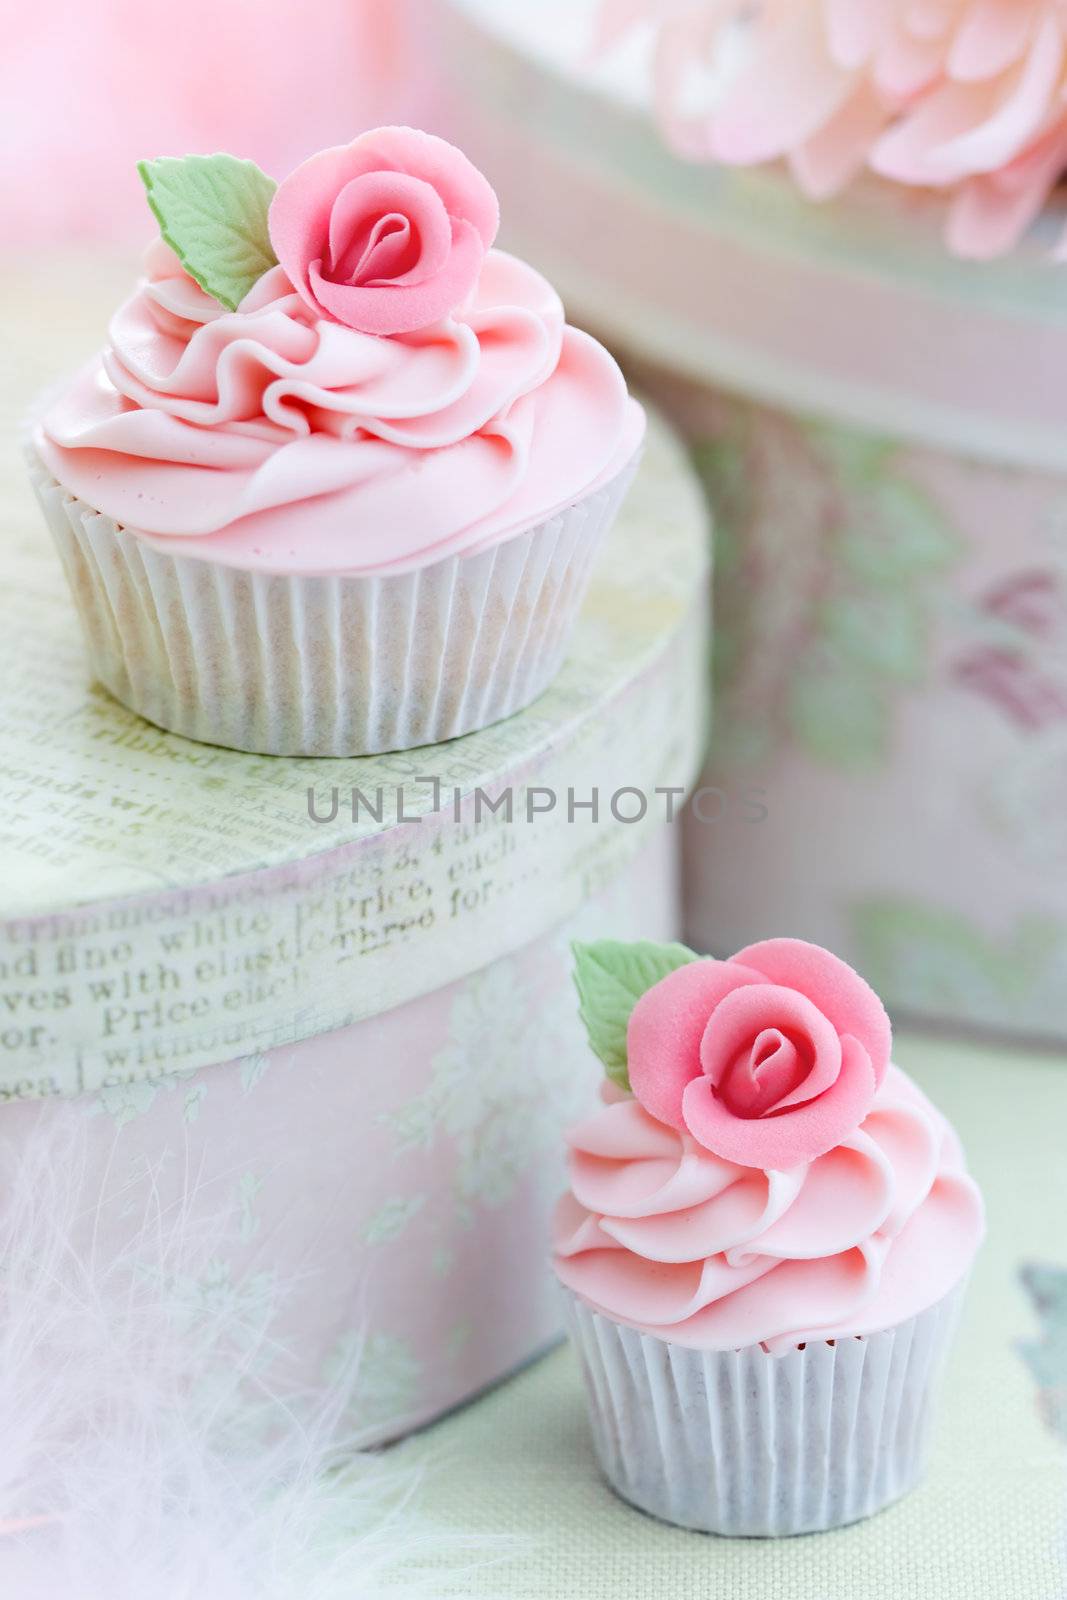 Cupcakes decorated with pink sugar roses